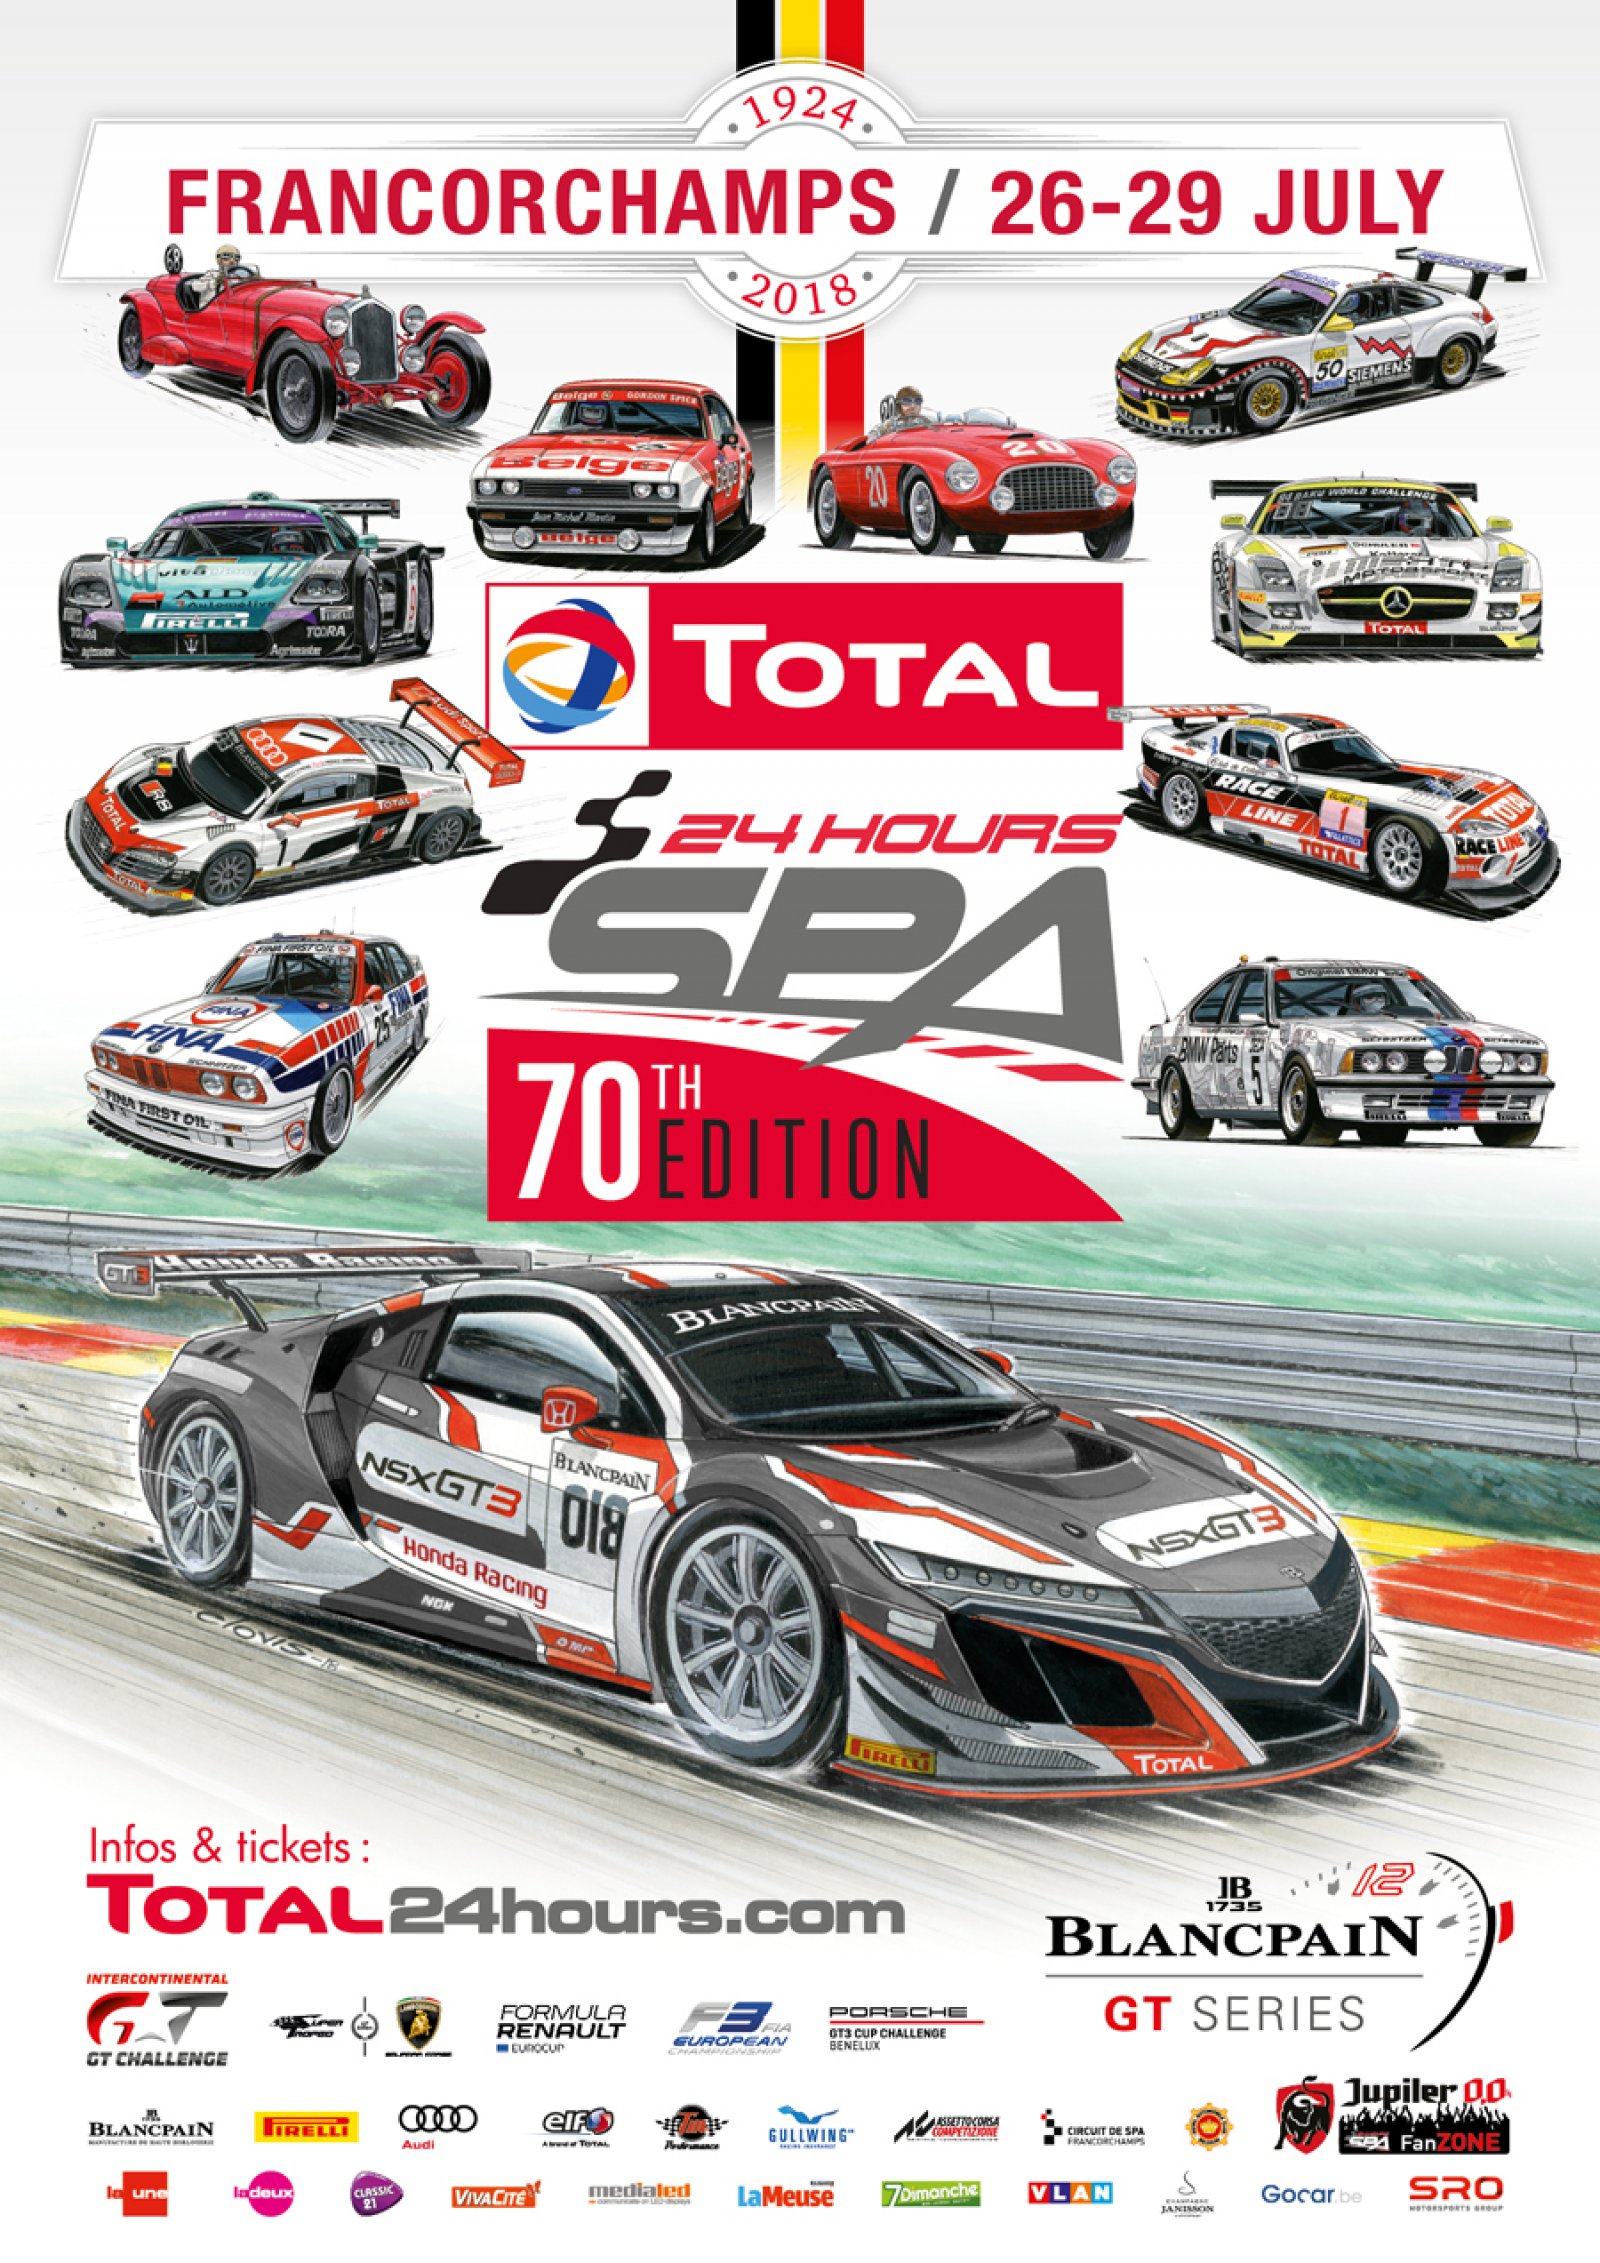 Total 24 Hours of Spa celebrates 70th edition with birthday card-inspired poster 